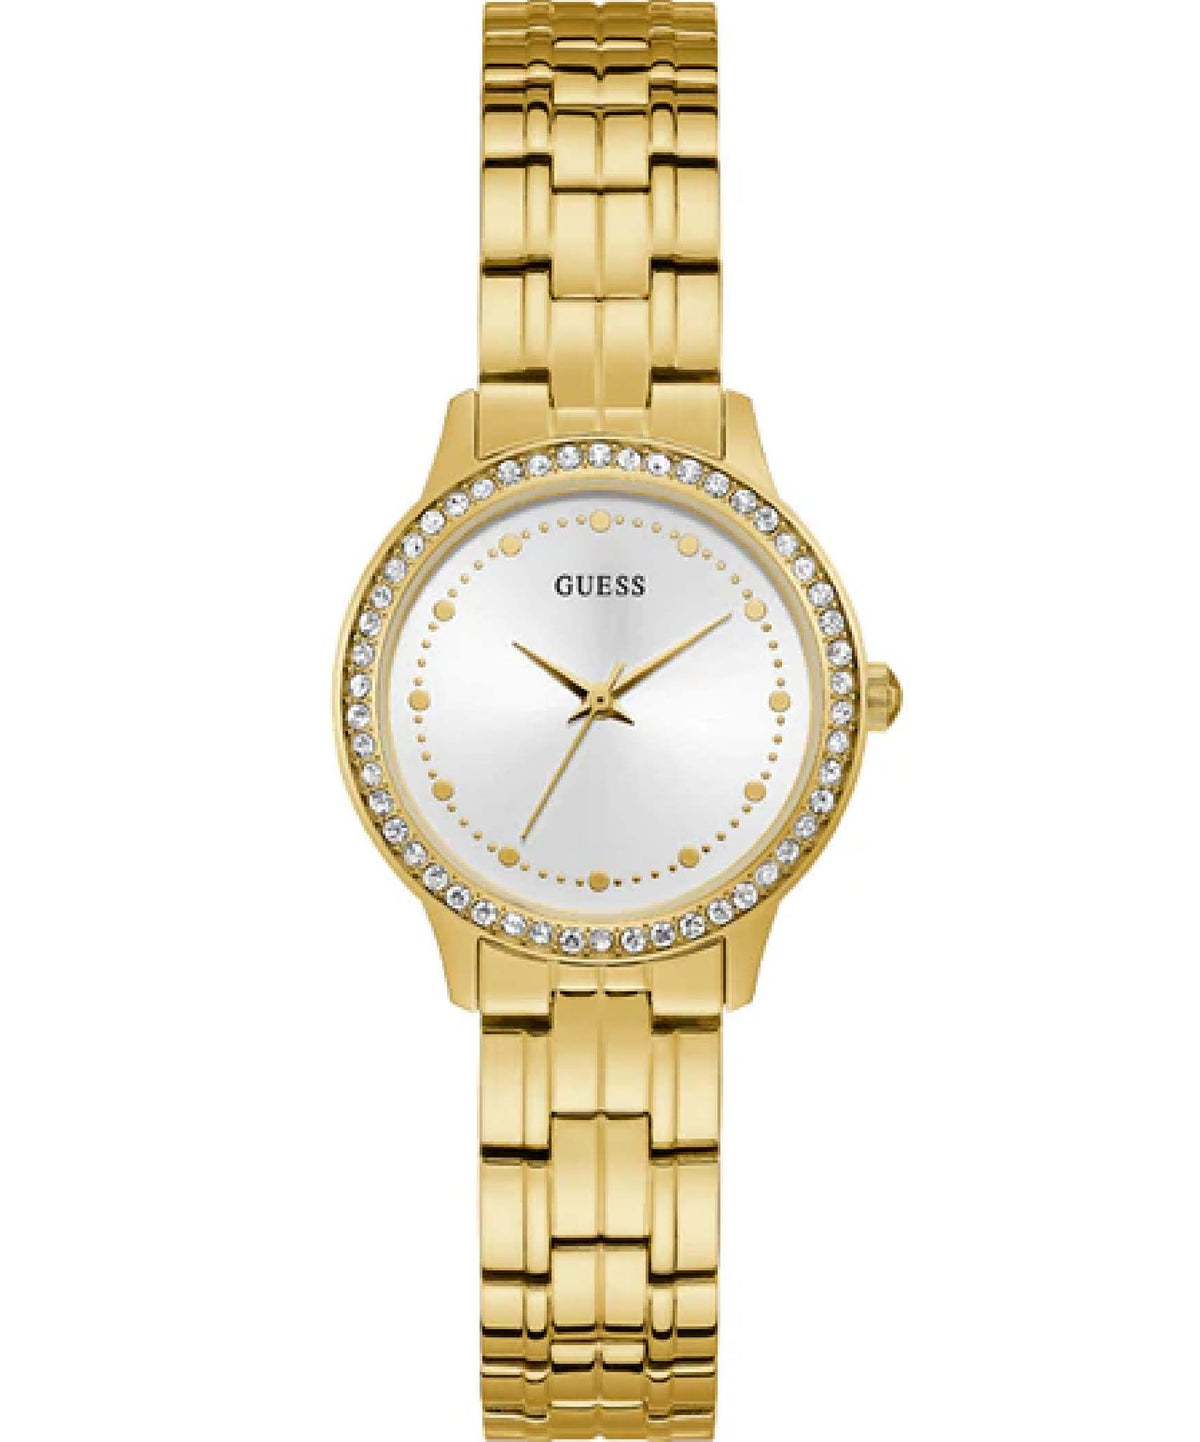 Guess, Women's Watch Analog, Silver Dial Gold Stainless Band, GW-W1209L2